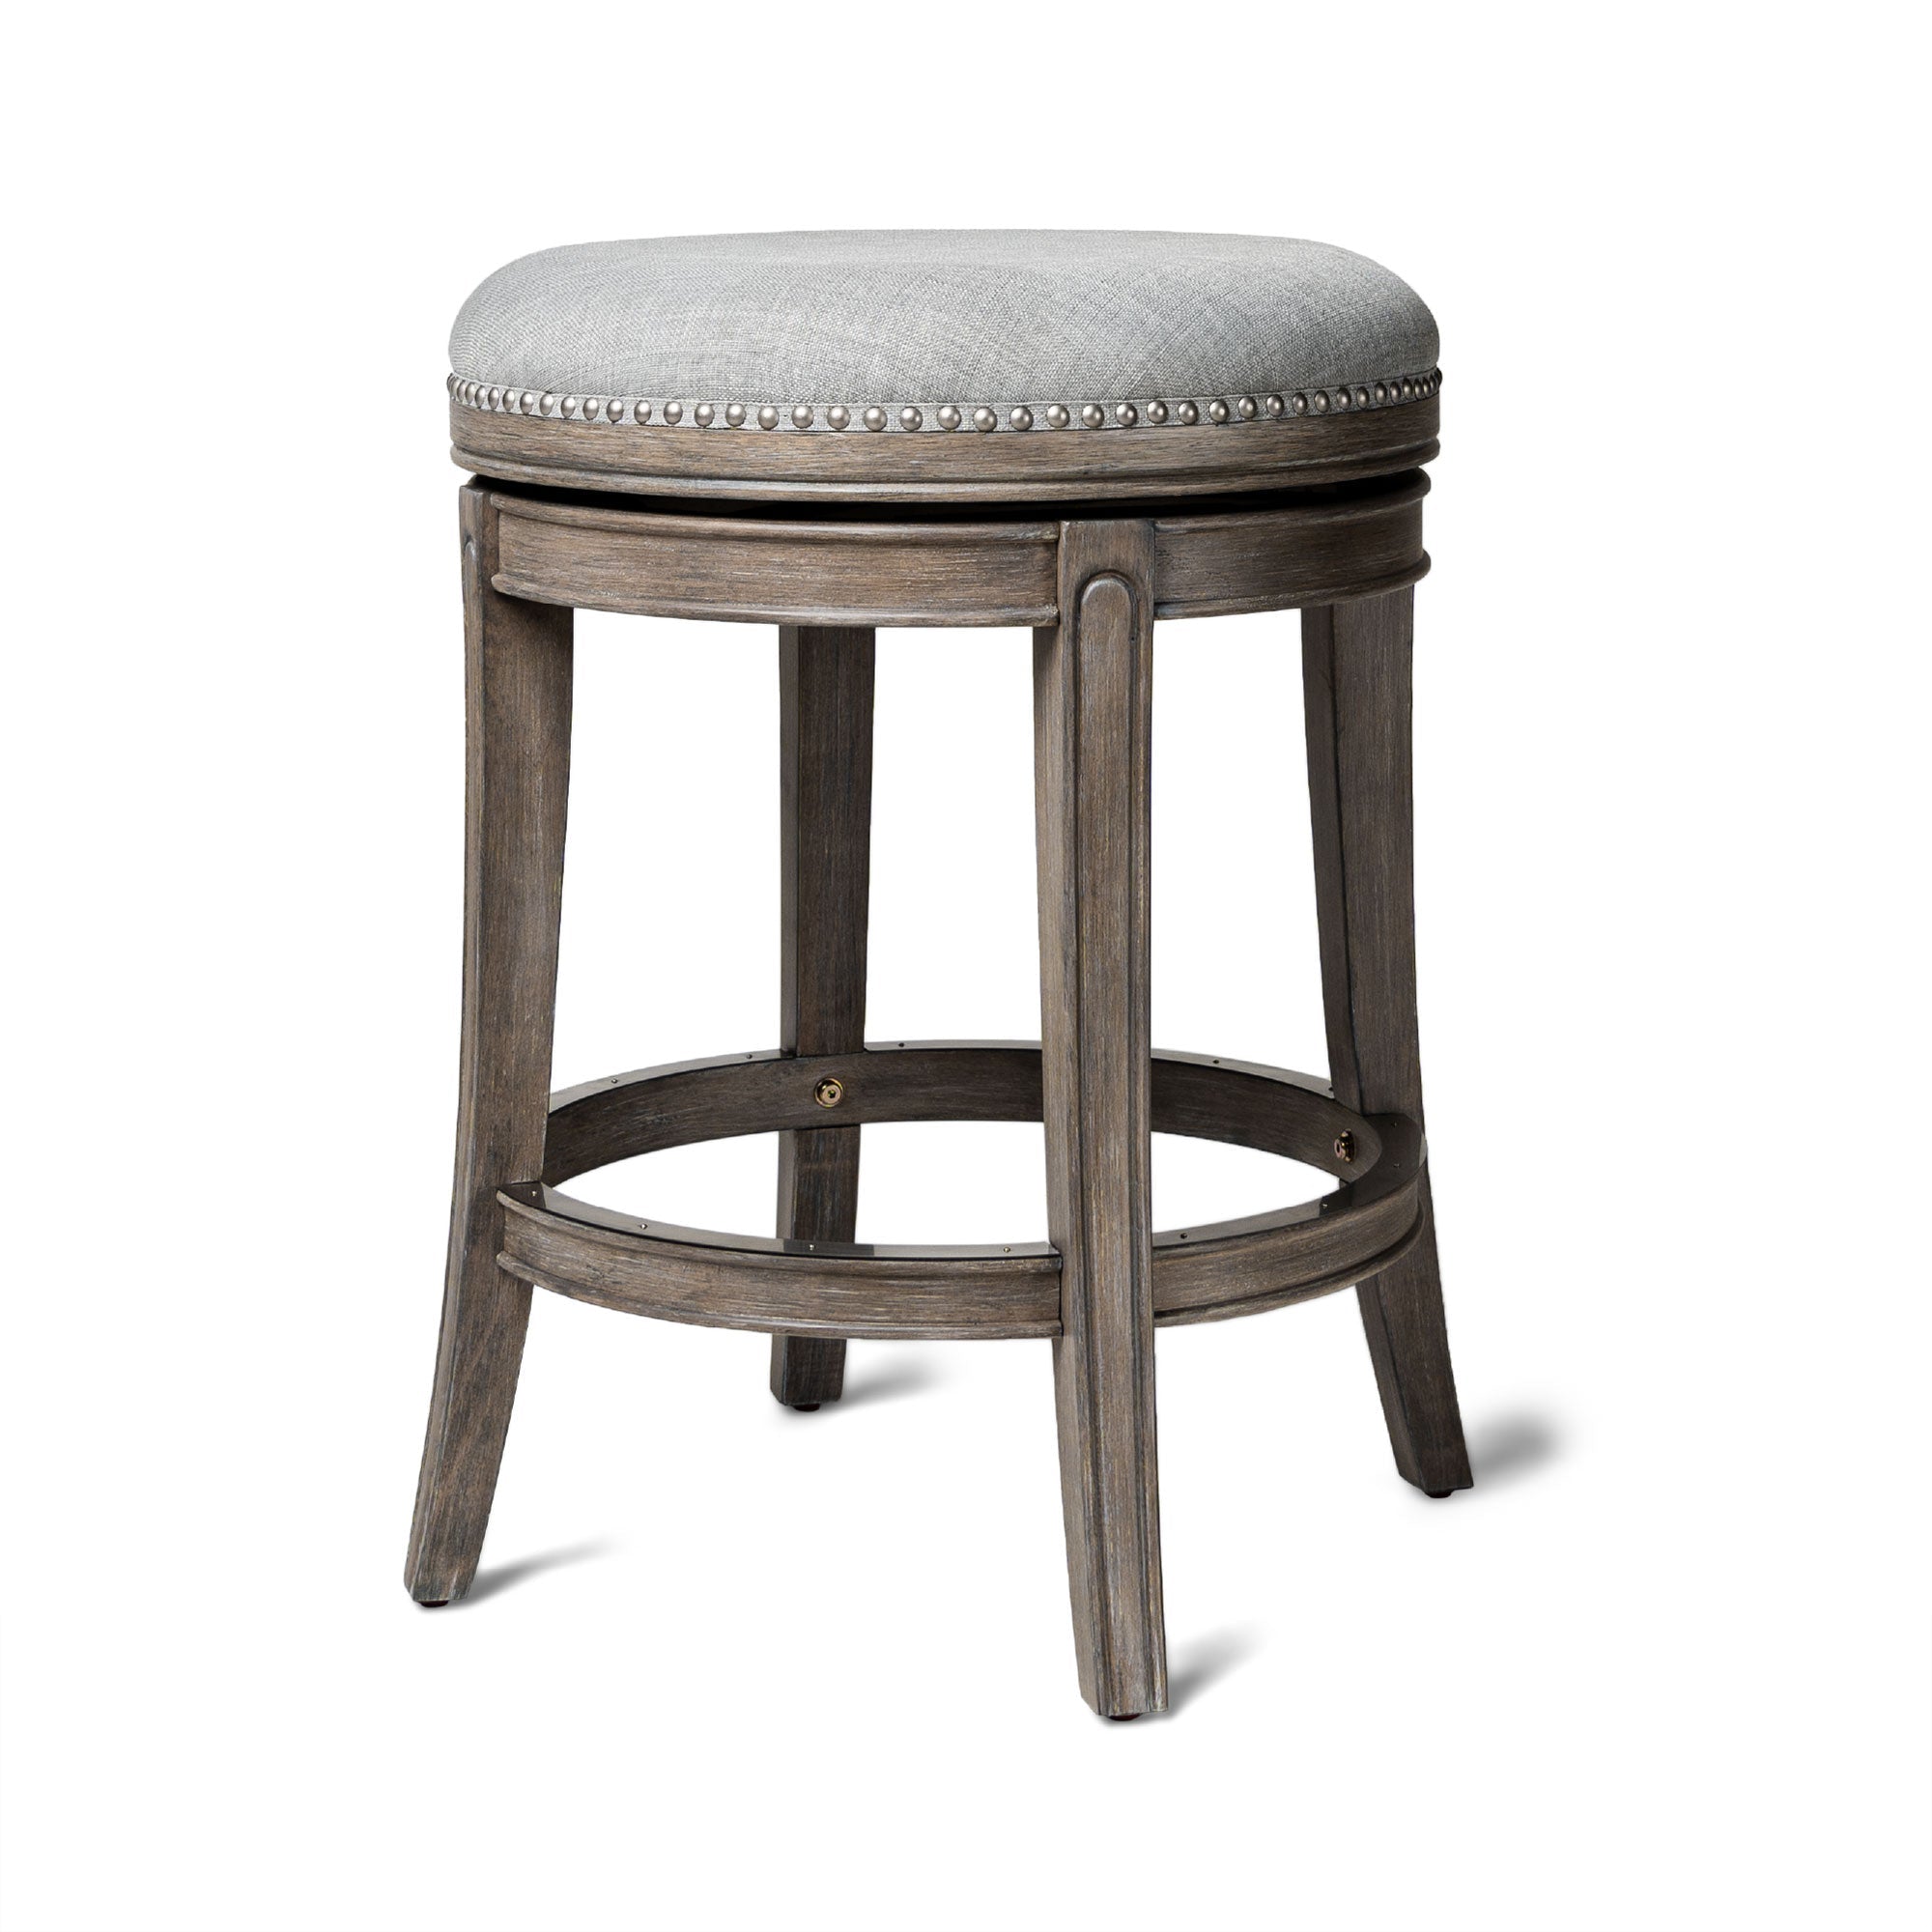 Alexander Backless Counter Stool in Reclaimed Oak Finish w/ Ash Grey Fabric Upholstery